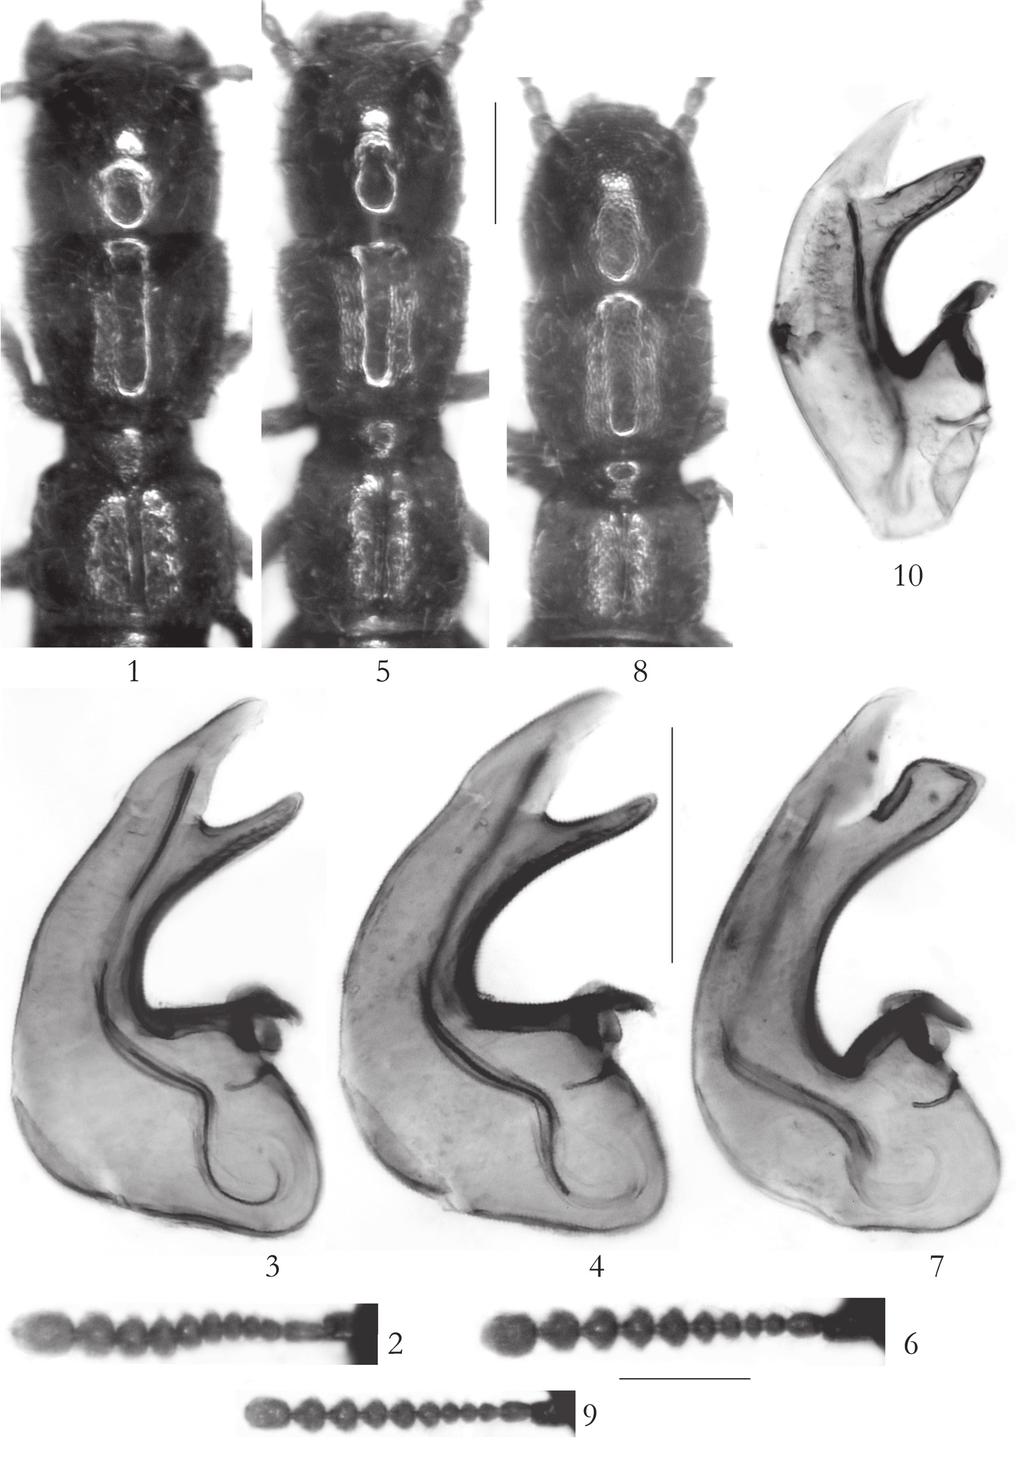 350 ASSING, V.: Three new species of endogean Osoriini from southern Spain Figs 1-10: Lusitanopsis andujari sp. n. ( 1-4), L. segurica sp. n. ( 5-7), and L.